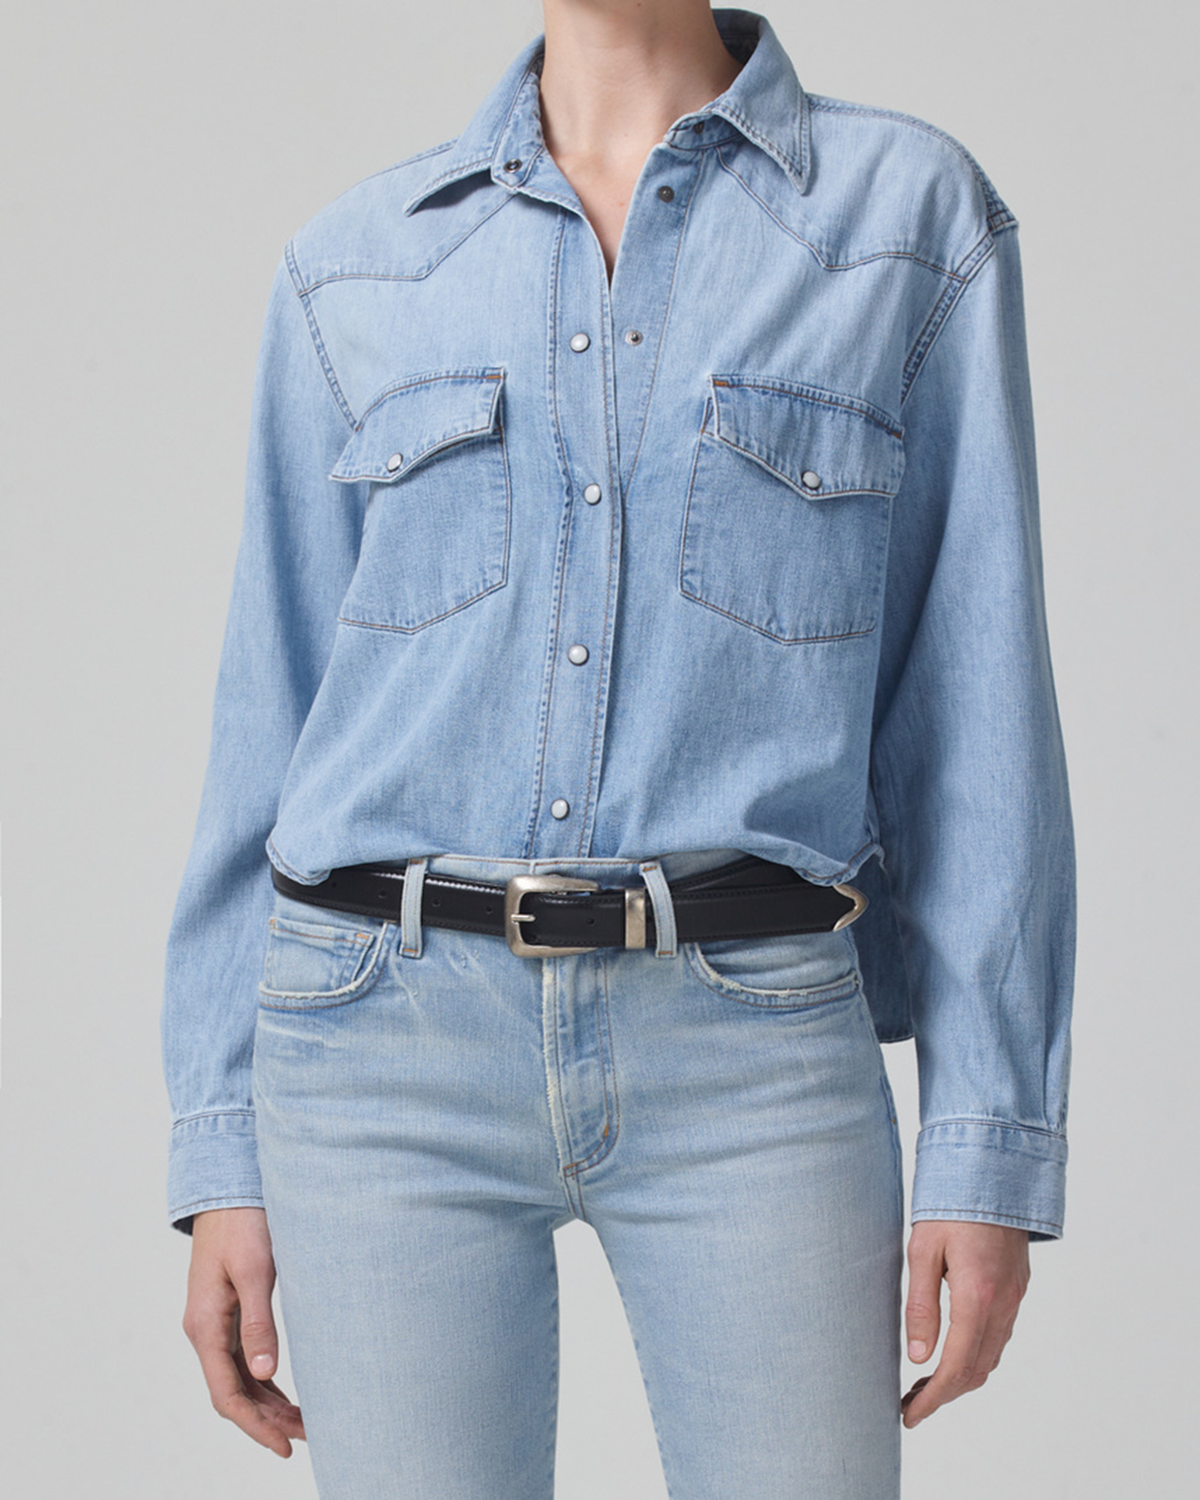 Featuring all the traditional Western style details - two chest pockets, front yoke, and a snap-front closure and crafted in our rigid, but breathable Japanese Denim Shirting, we updated the classic silhouette to have a cropped body, making it the perfect piece to pair back to high waist denim for a whole denim-on-denim look.